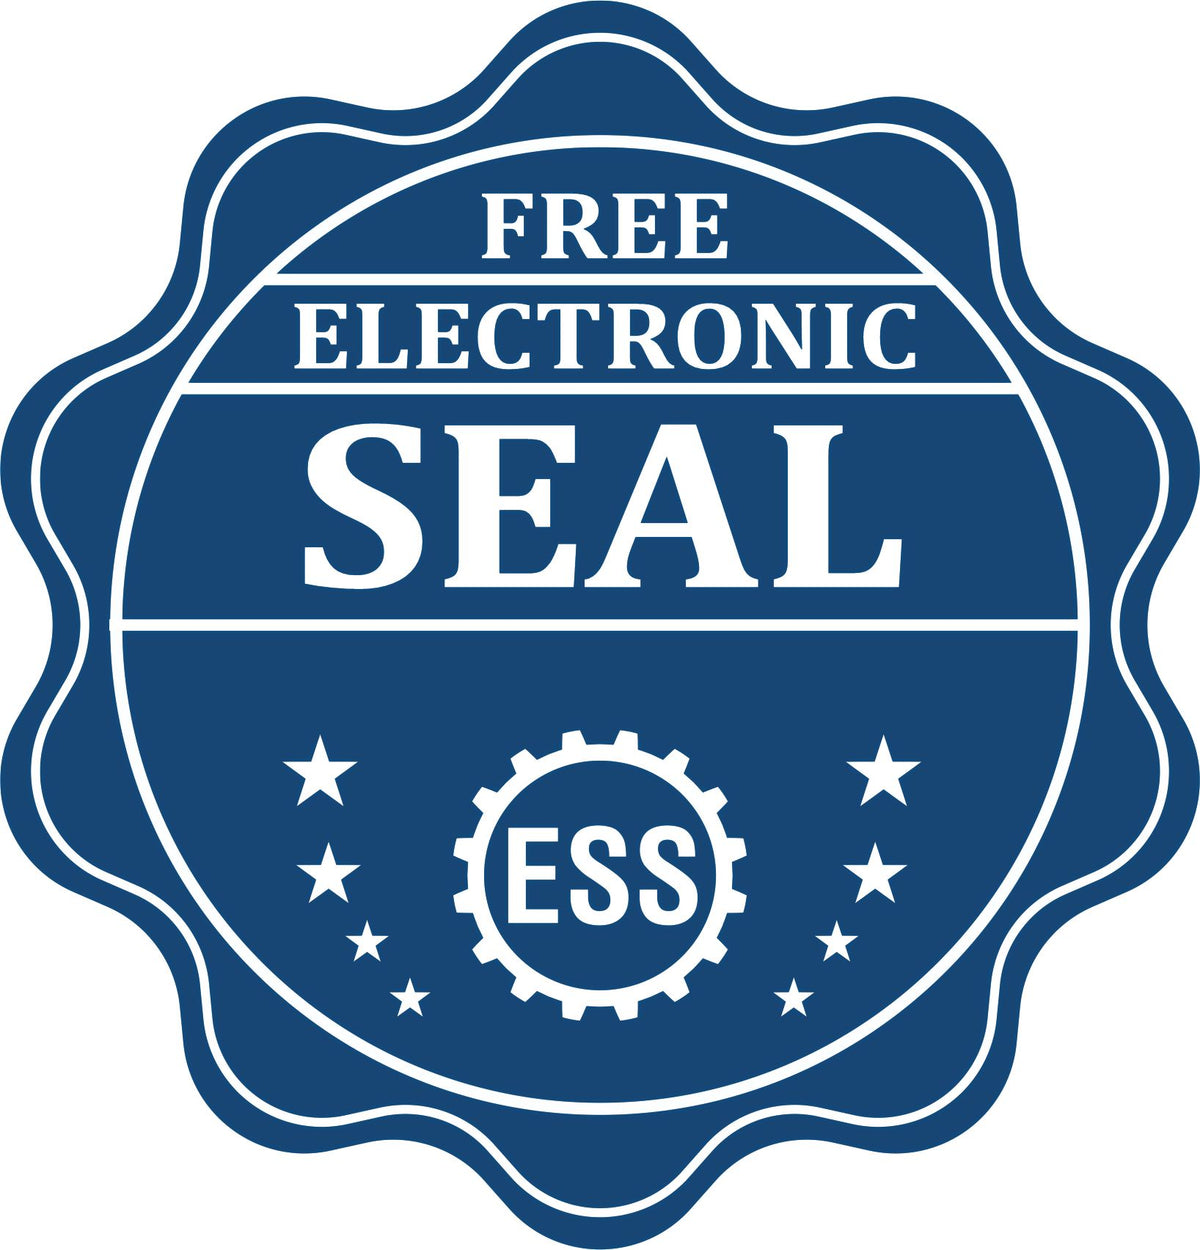 A badge showing a free electronic seal for the Heavy Duty Cast Iron New Mexico Engineer Seal Embosser with stars and the ESS gear on the emblem.